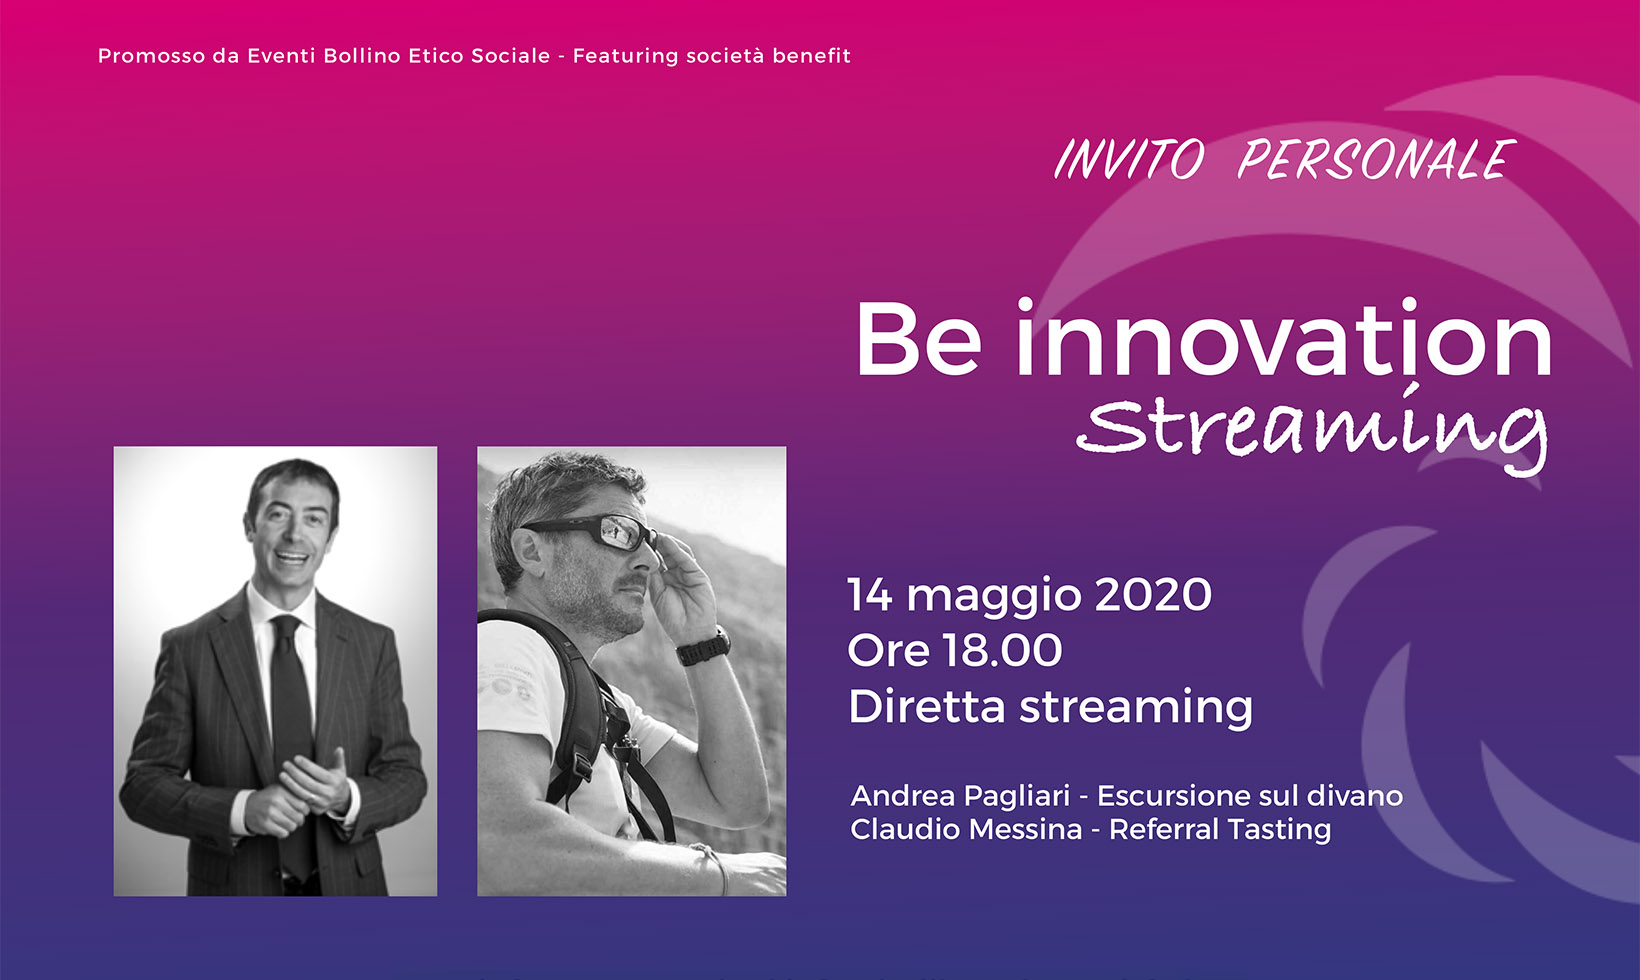 Be Innovation Streaming - Claudio Messina - Referral Tasting - 14 maggio 2020